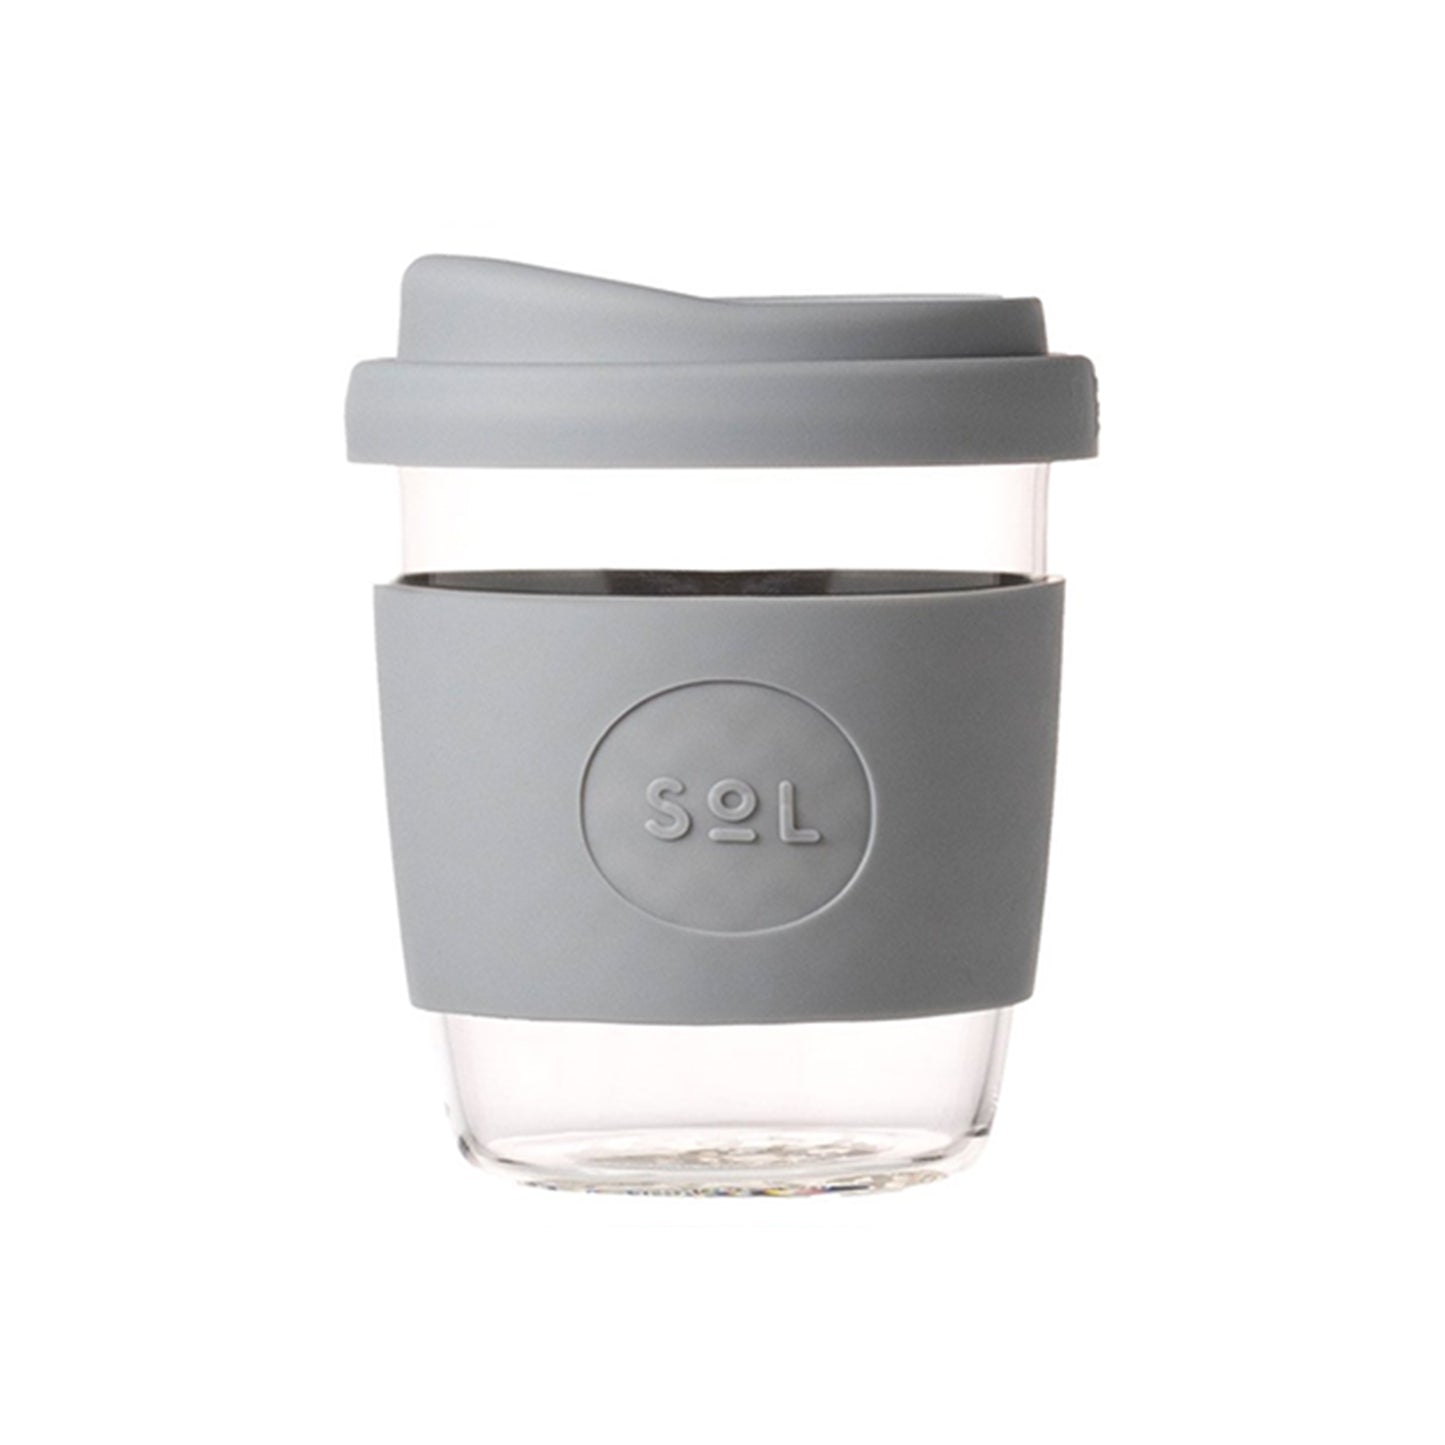 Reusable SoL glass cup and personal sleeve in grey